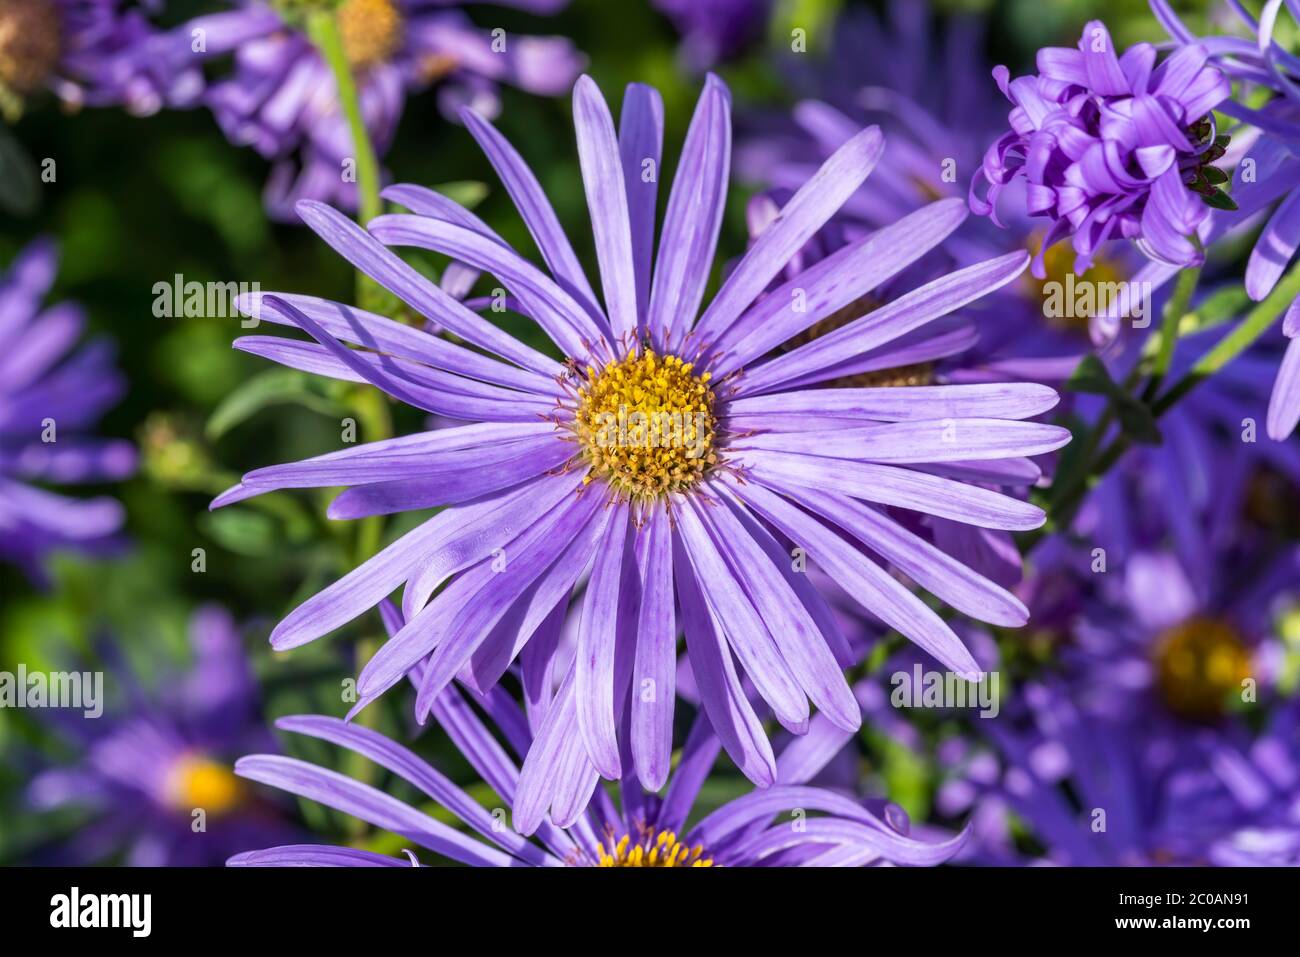 Aster x frikartii 'Monch' a lavender blue herbaceous perennial summer autumn flower plant commonly known as michaelmas daisy stock photo, Stock Photo